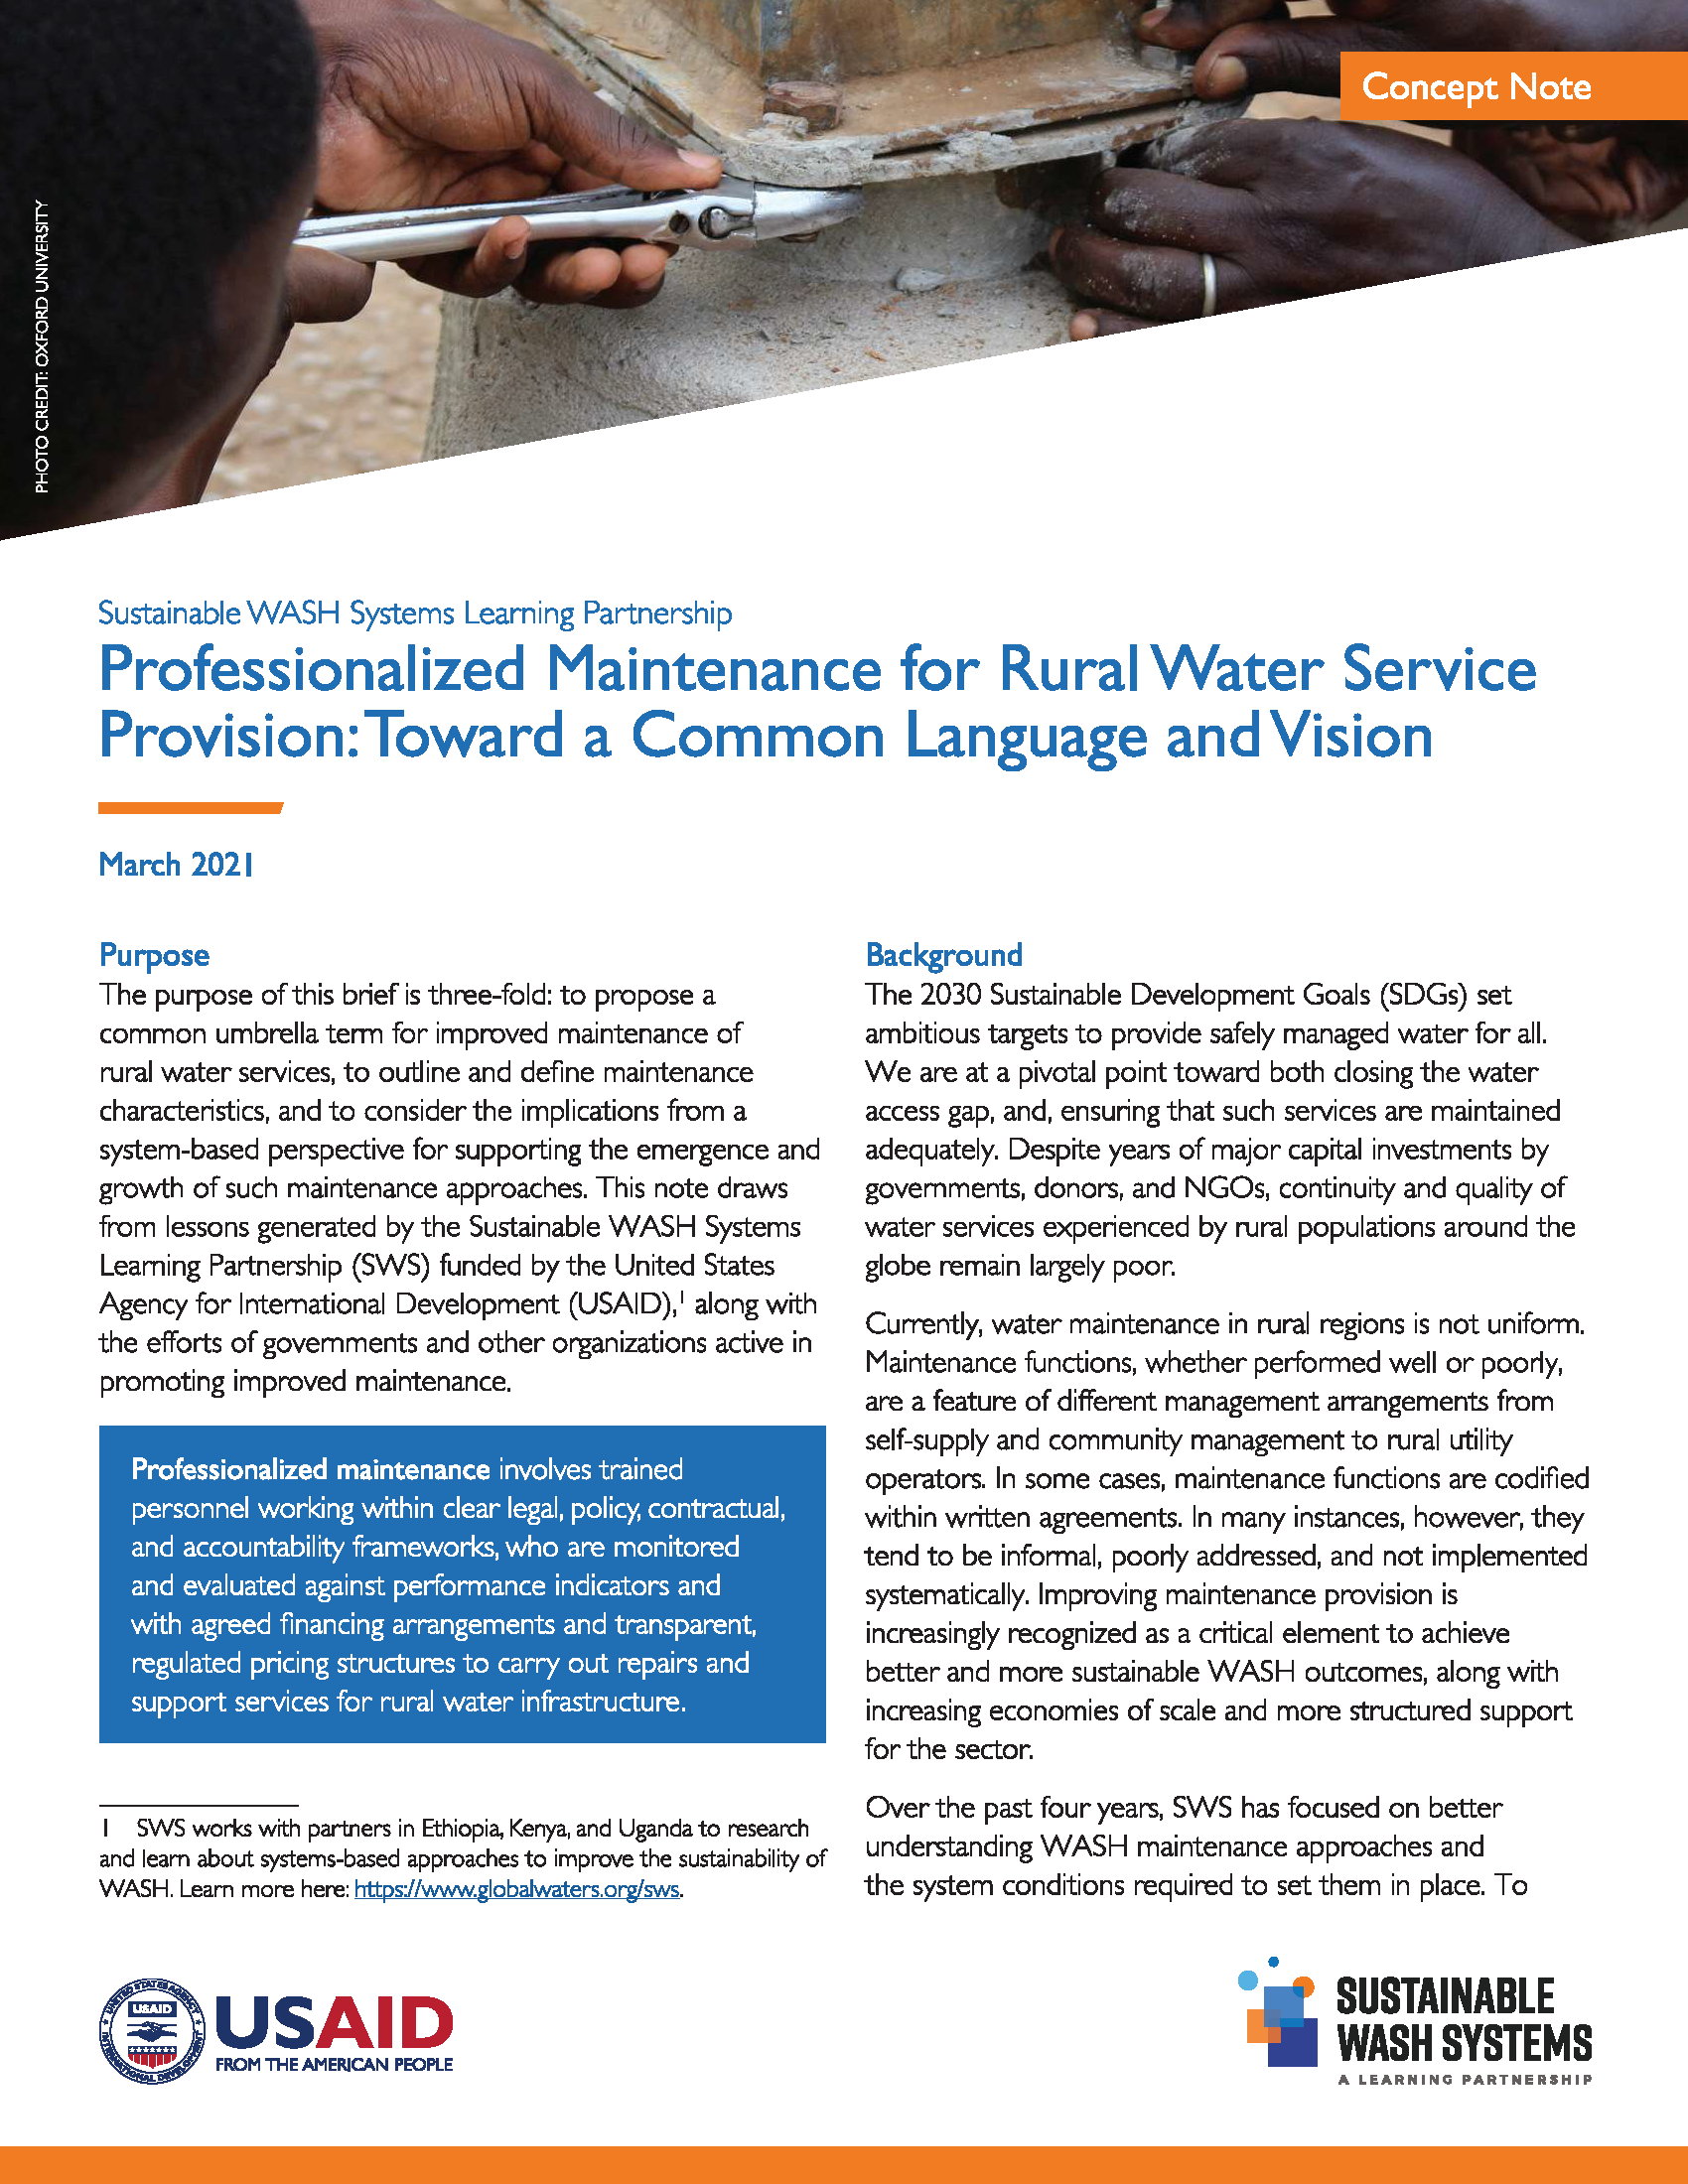 Cover Page of "Professionalized Maintenance for Rural Water Service Provision: Toward a Common Language and Vision."